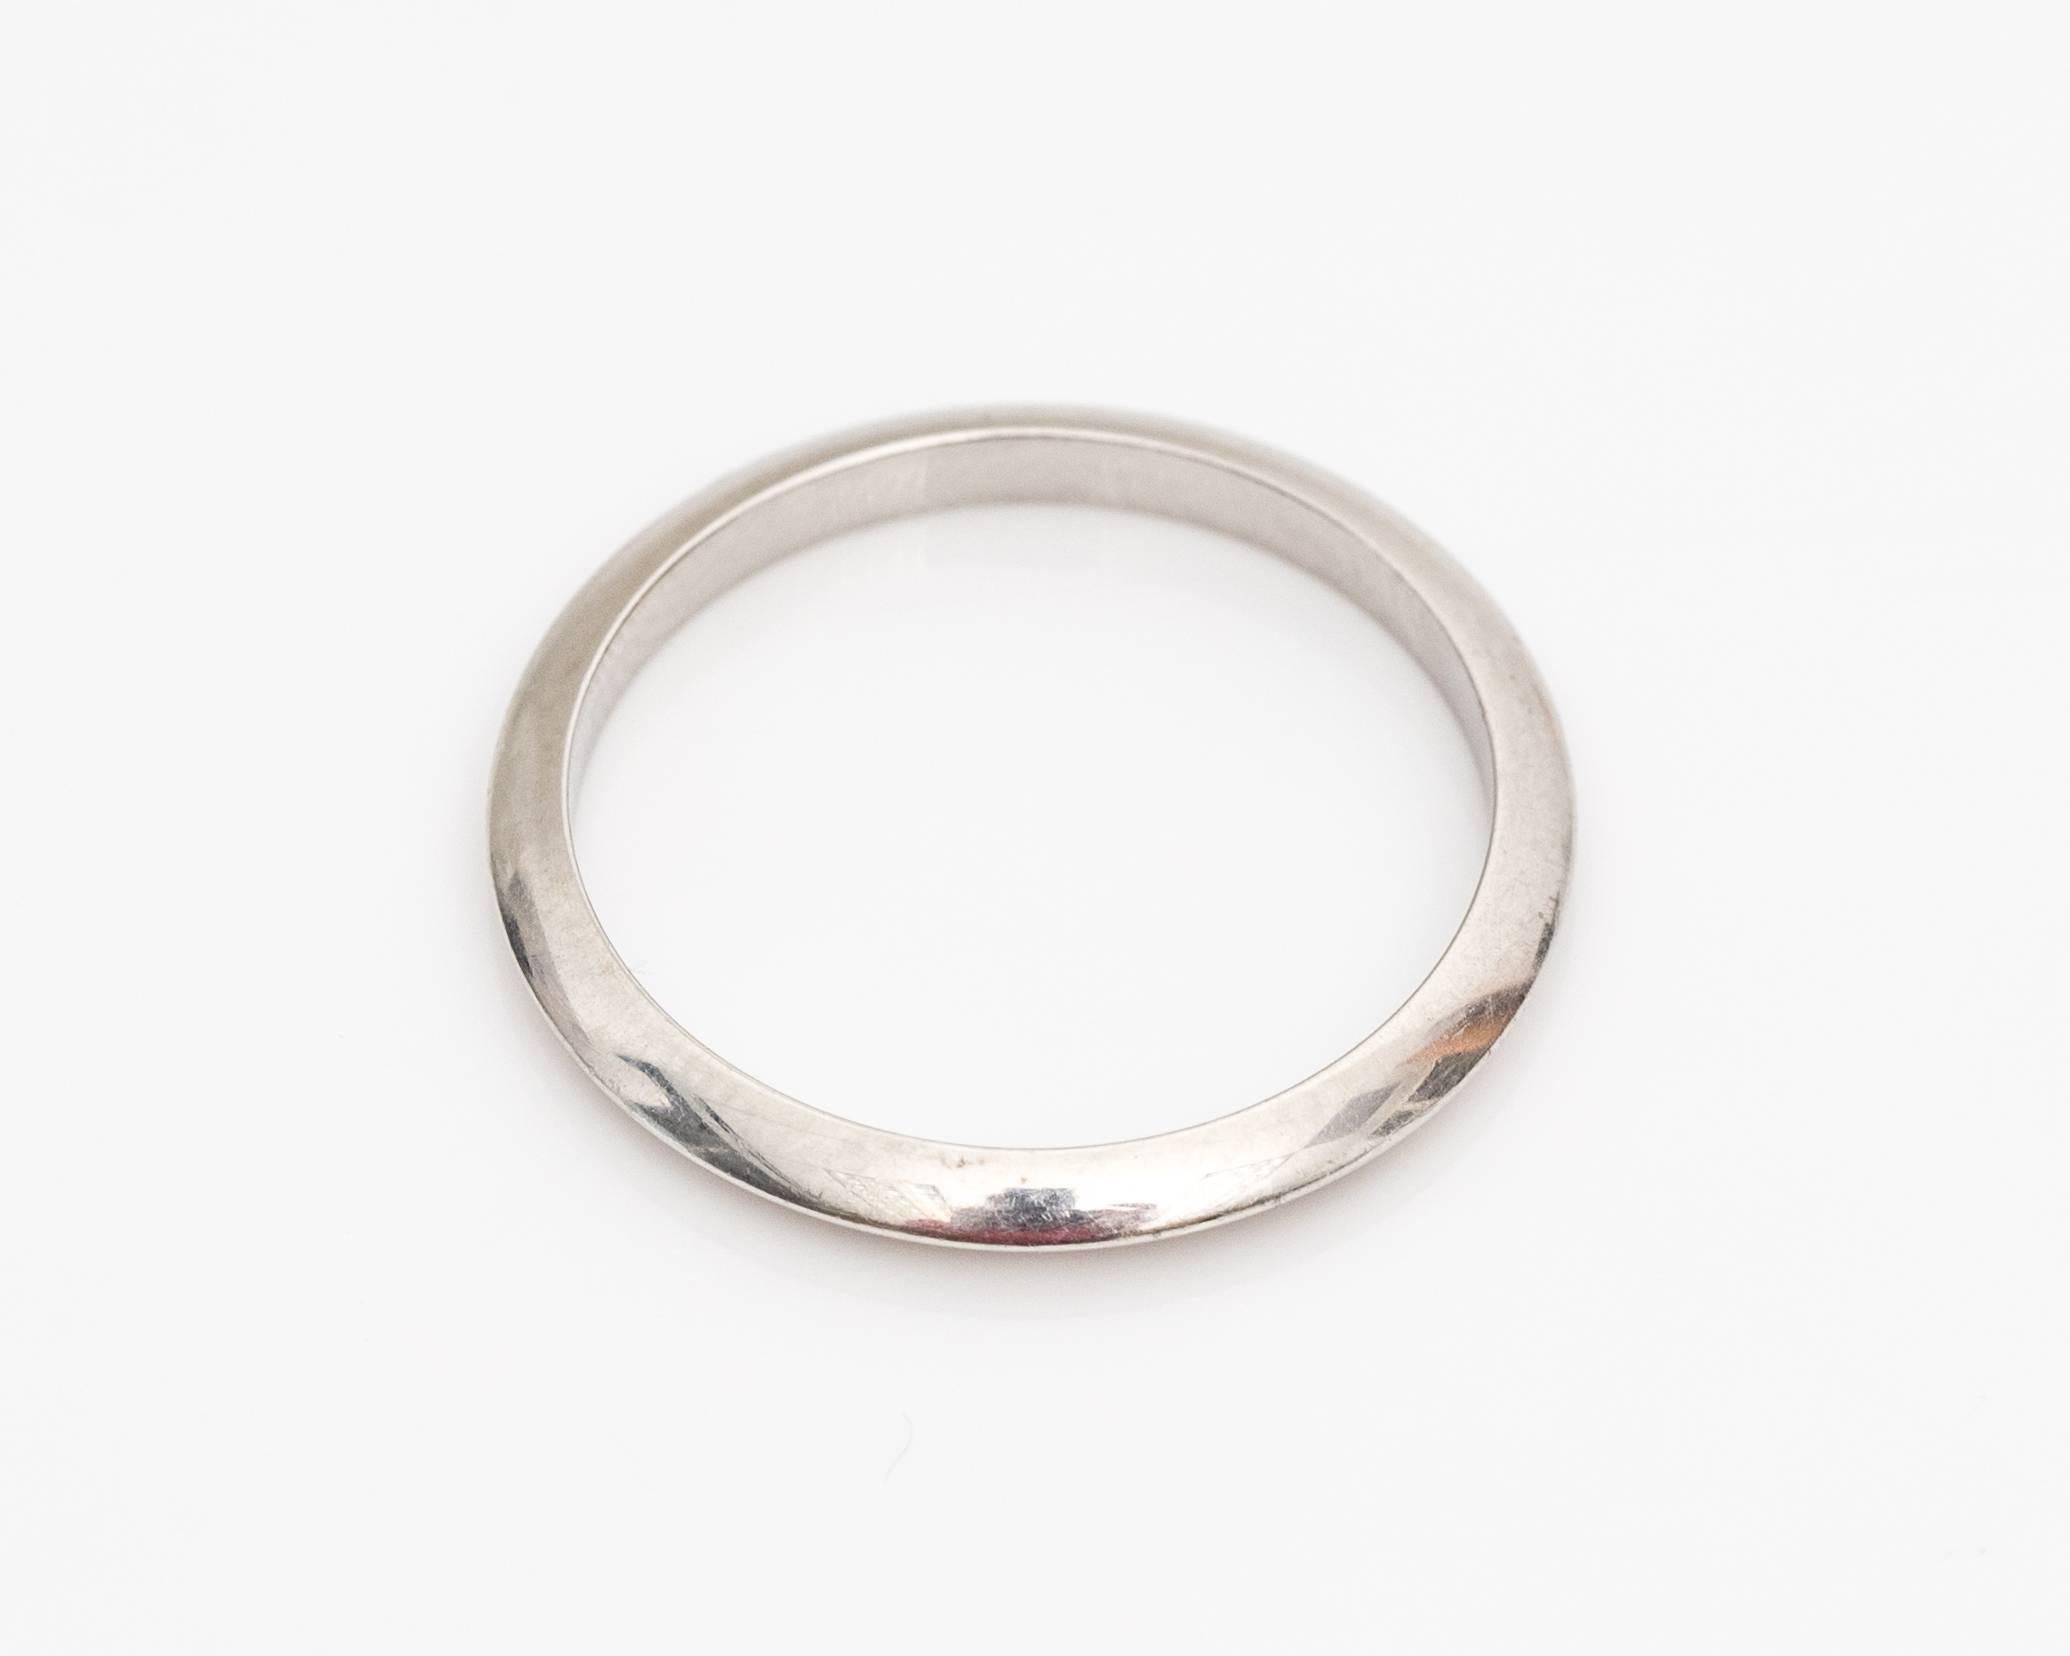 The perfect band for a bit of dramatic flair. The knife edge style adds a bold look alongside your engagement ring. 
Two Wedding Bands Available for Purchase - Buy One or Buy Both to match with your loved one! 
Modern Chic Look with 1950s flair.